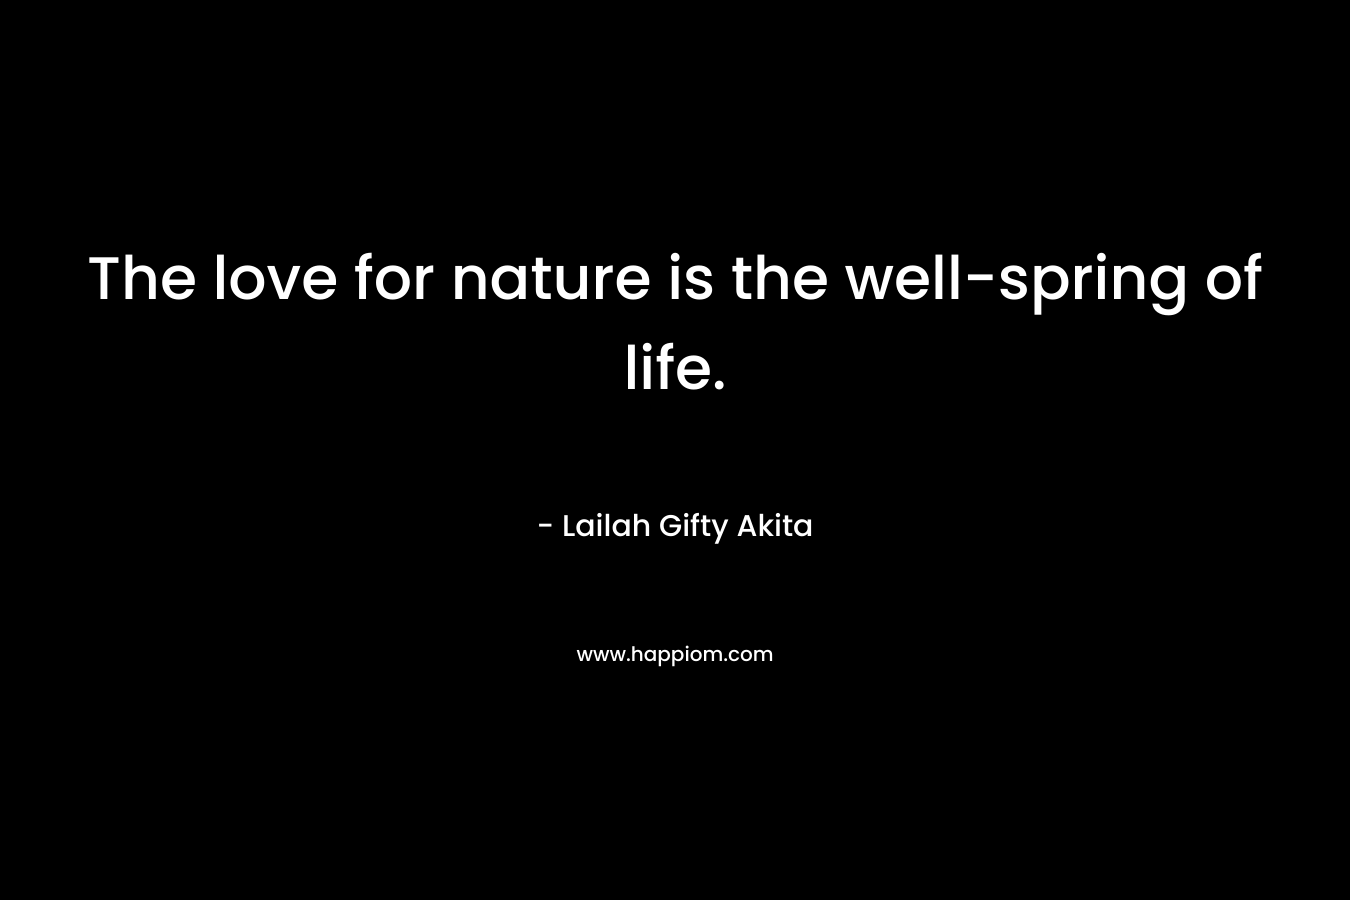 The love for nature is the well-spring of life. – Lailah Gifty Akita